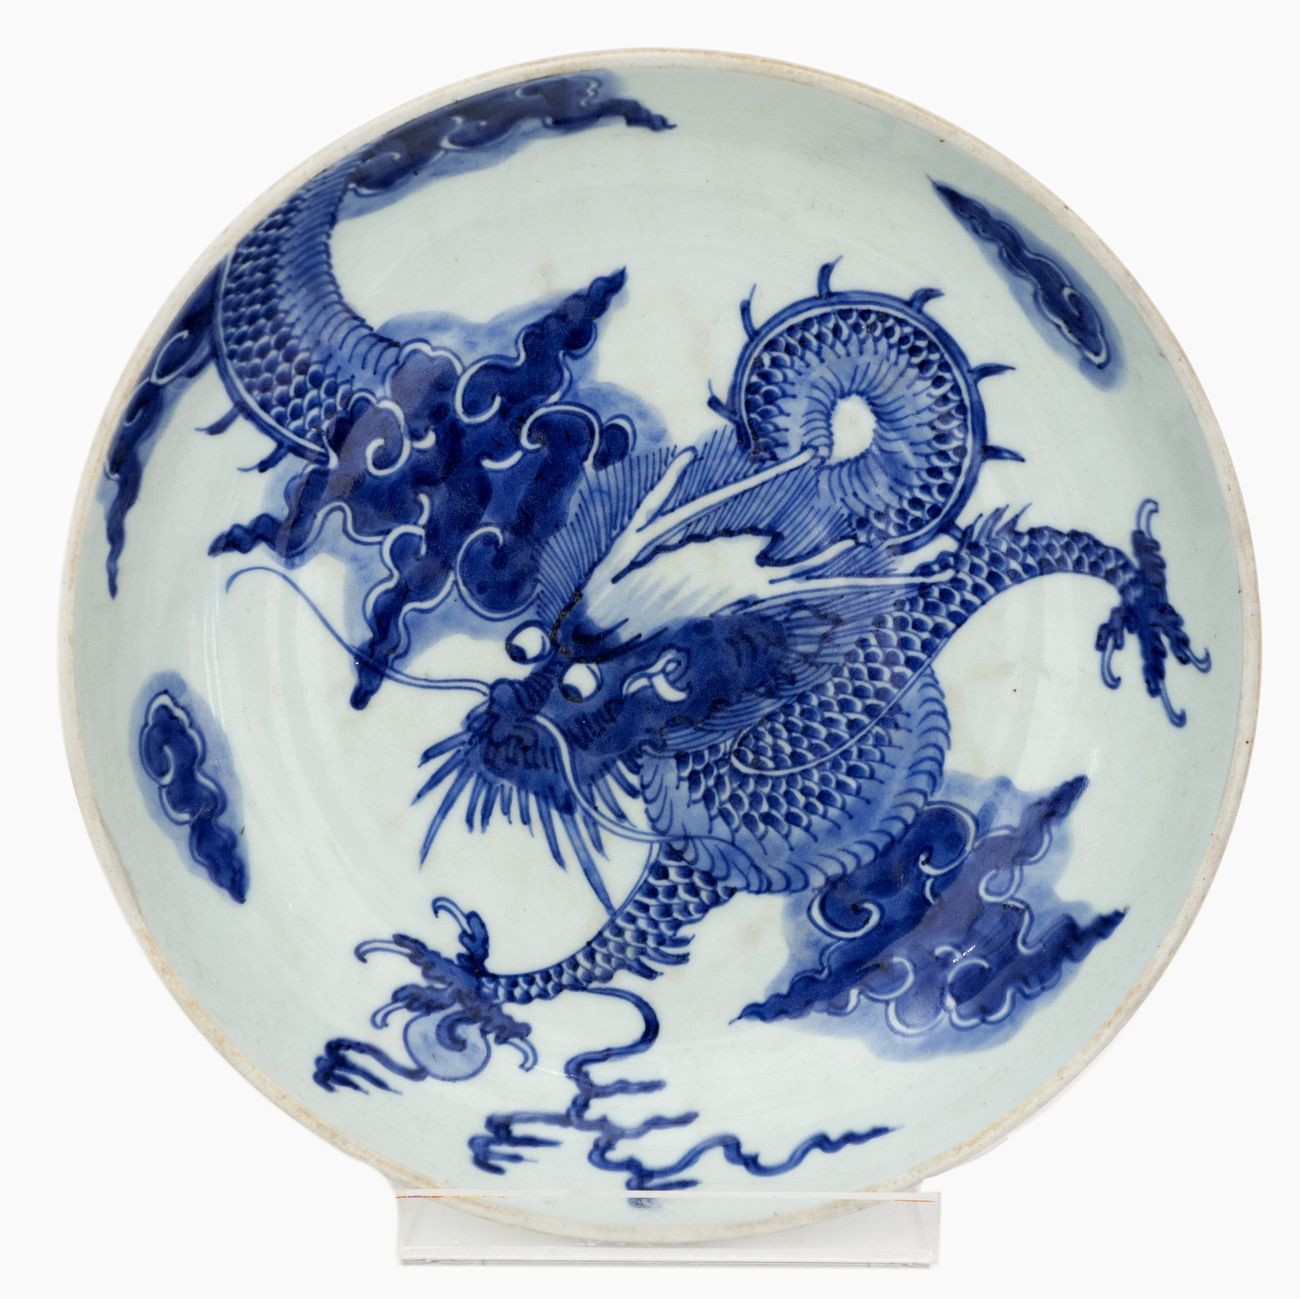 Null China, 19th century for Vietnam
Porcelain dish in blue-white enamel with dr&hellip;